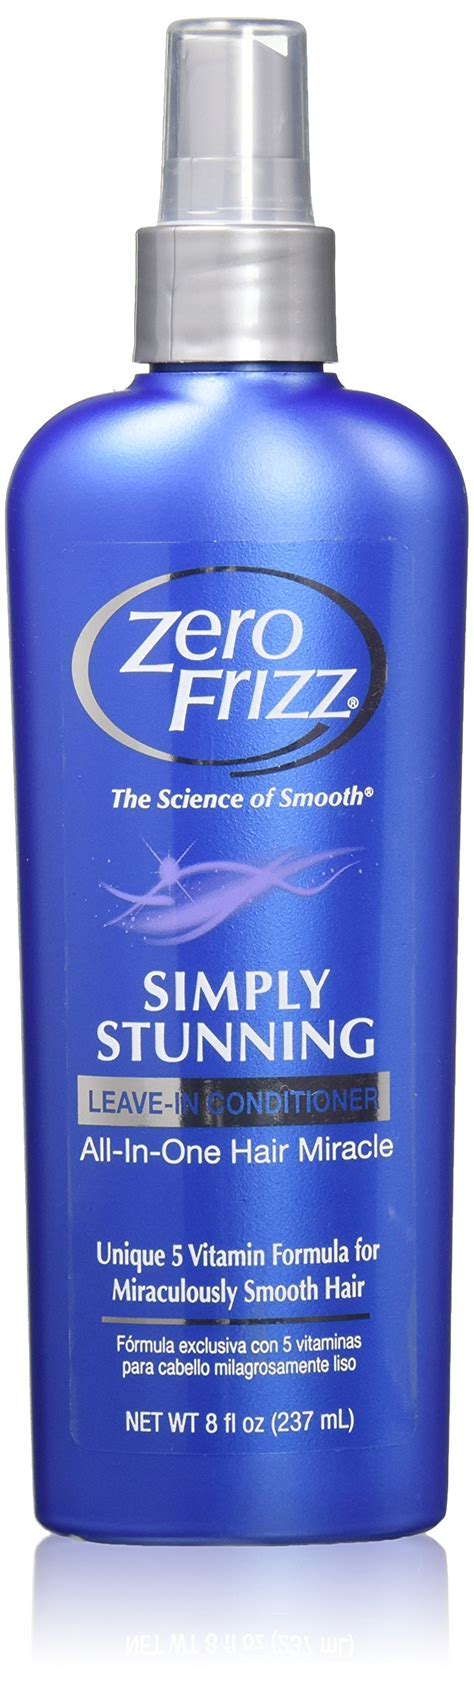 I was just roaming around a popular local drugstore namely, watsons, and this product caught my eyes. Amazon.com: Zero Frizz Corrective Hair Serum Extra ...